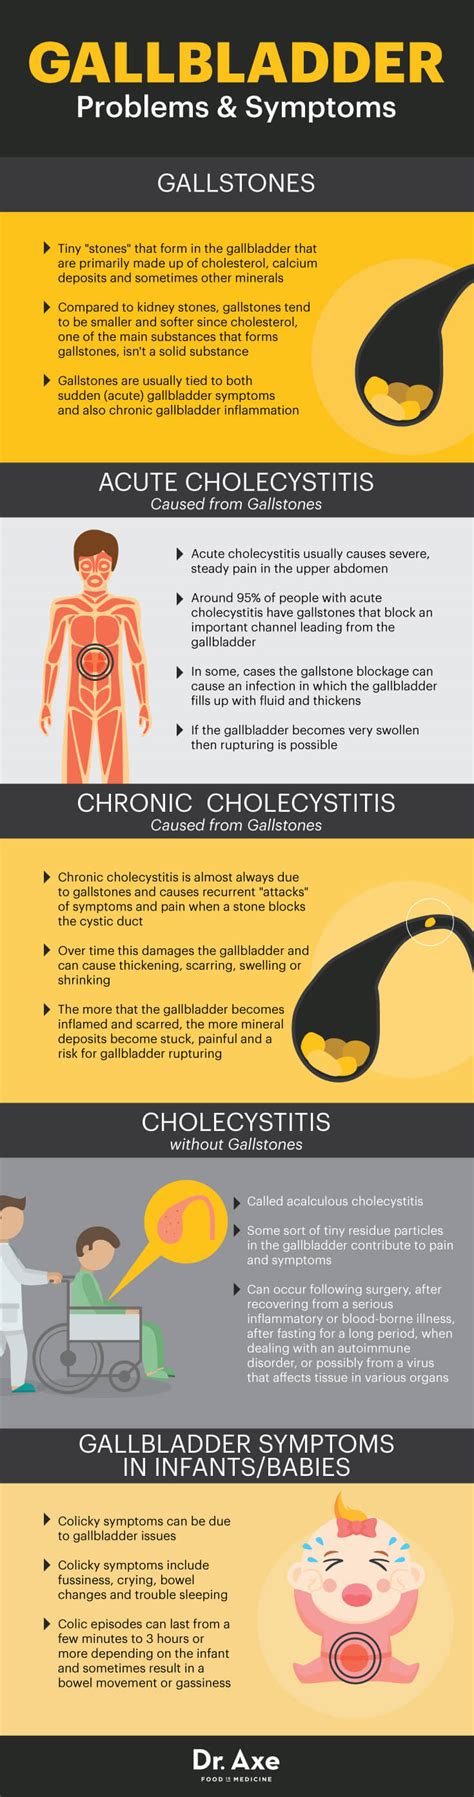 Gallbladder Symptoms, Causes of Pain & Risk Factors   Dr. Axe